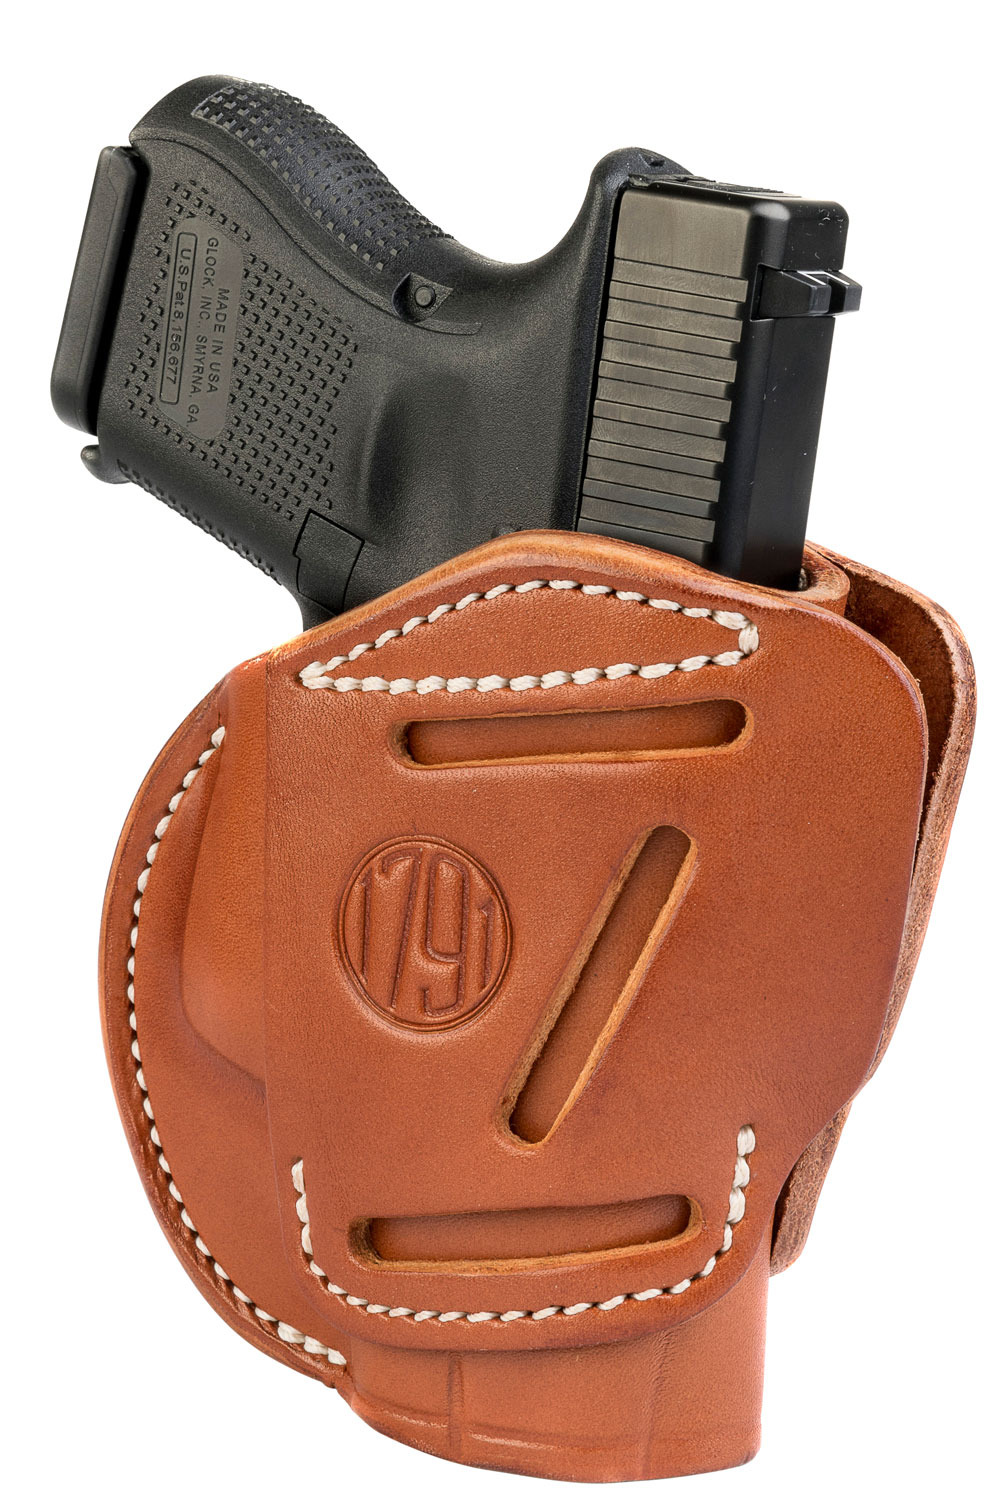 1791 Gunleather 3WH3CBRA 3 Way  Brown Leather OWB fits Glock 26;Ruger LC9;S&W Shield Ambidextrous Hand